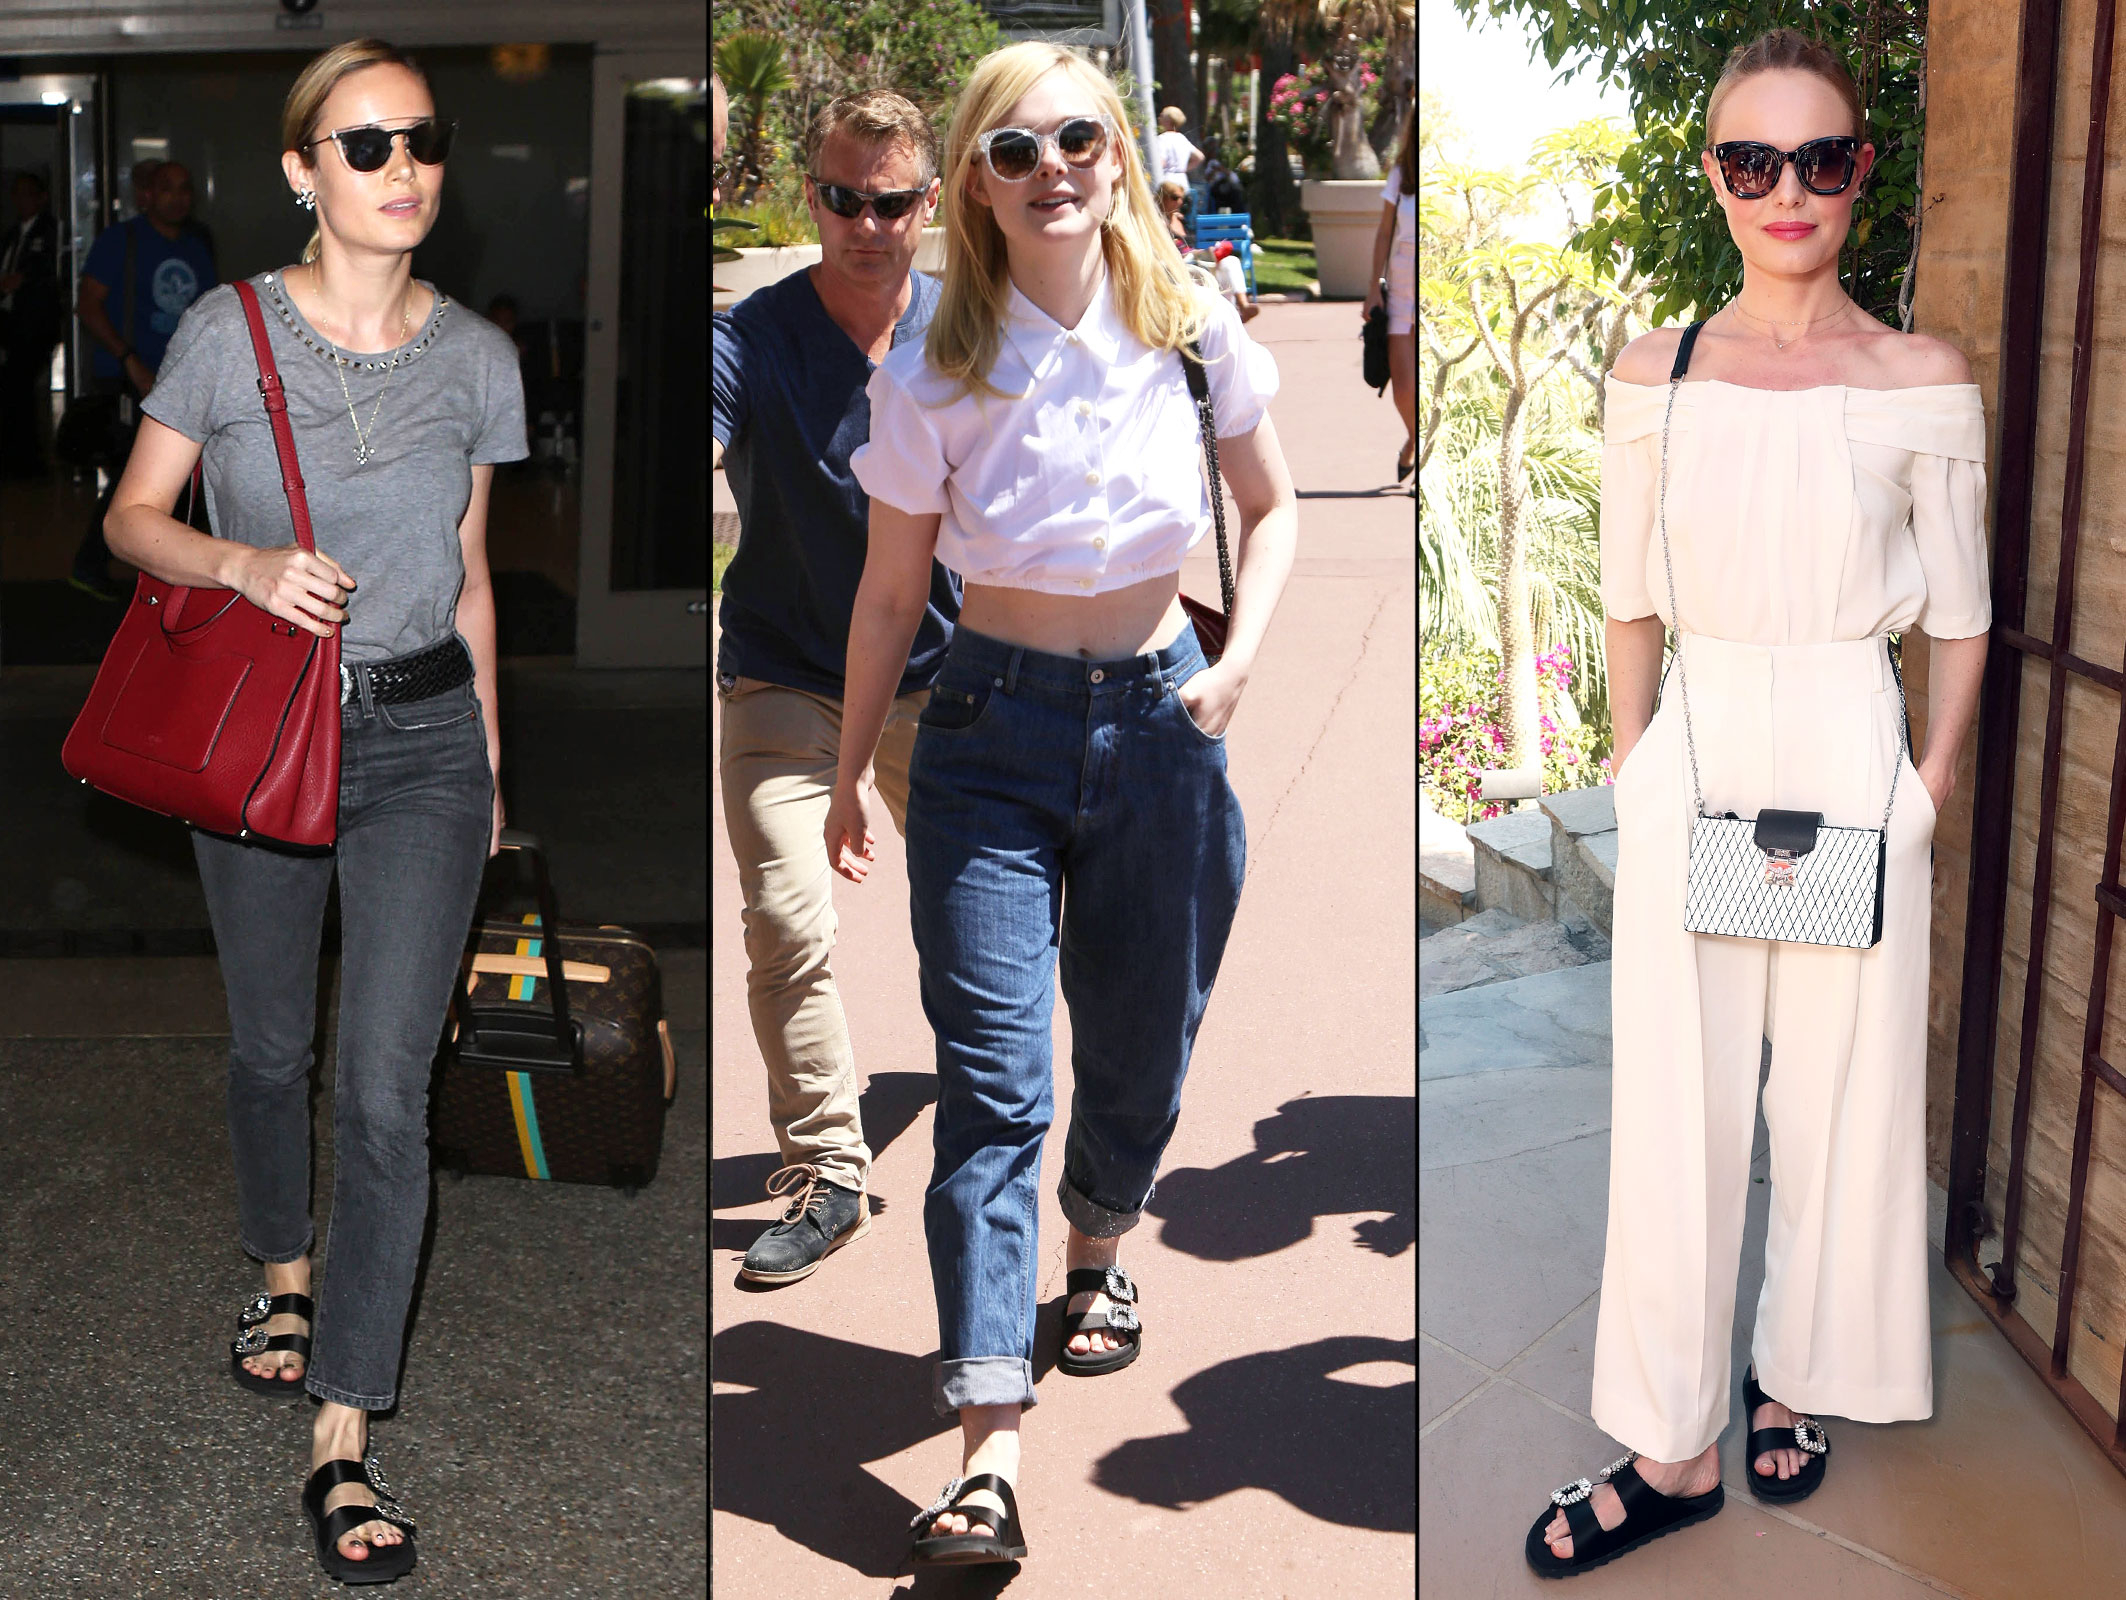 Celebrities Are Loving This Bedazzled Take on Birkenstocks